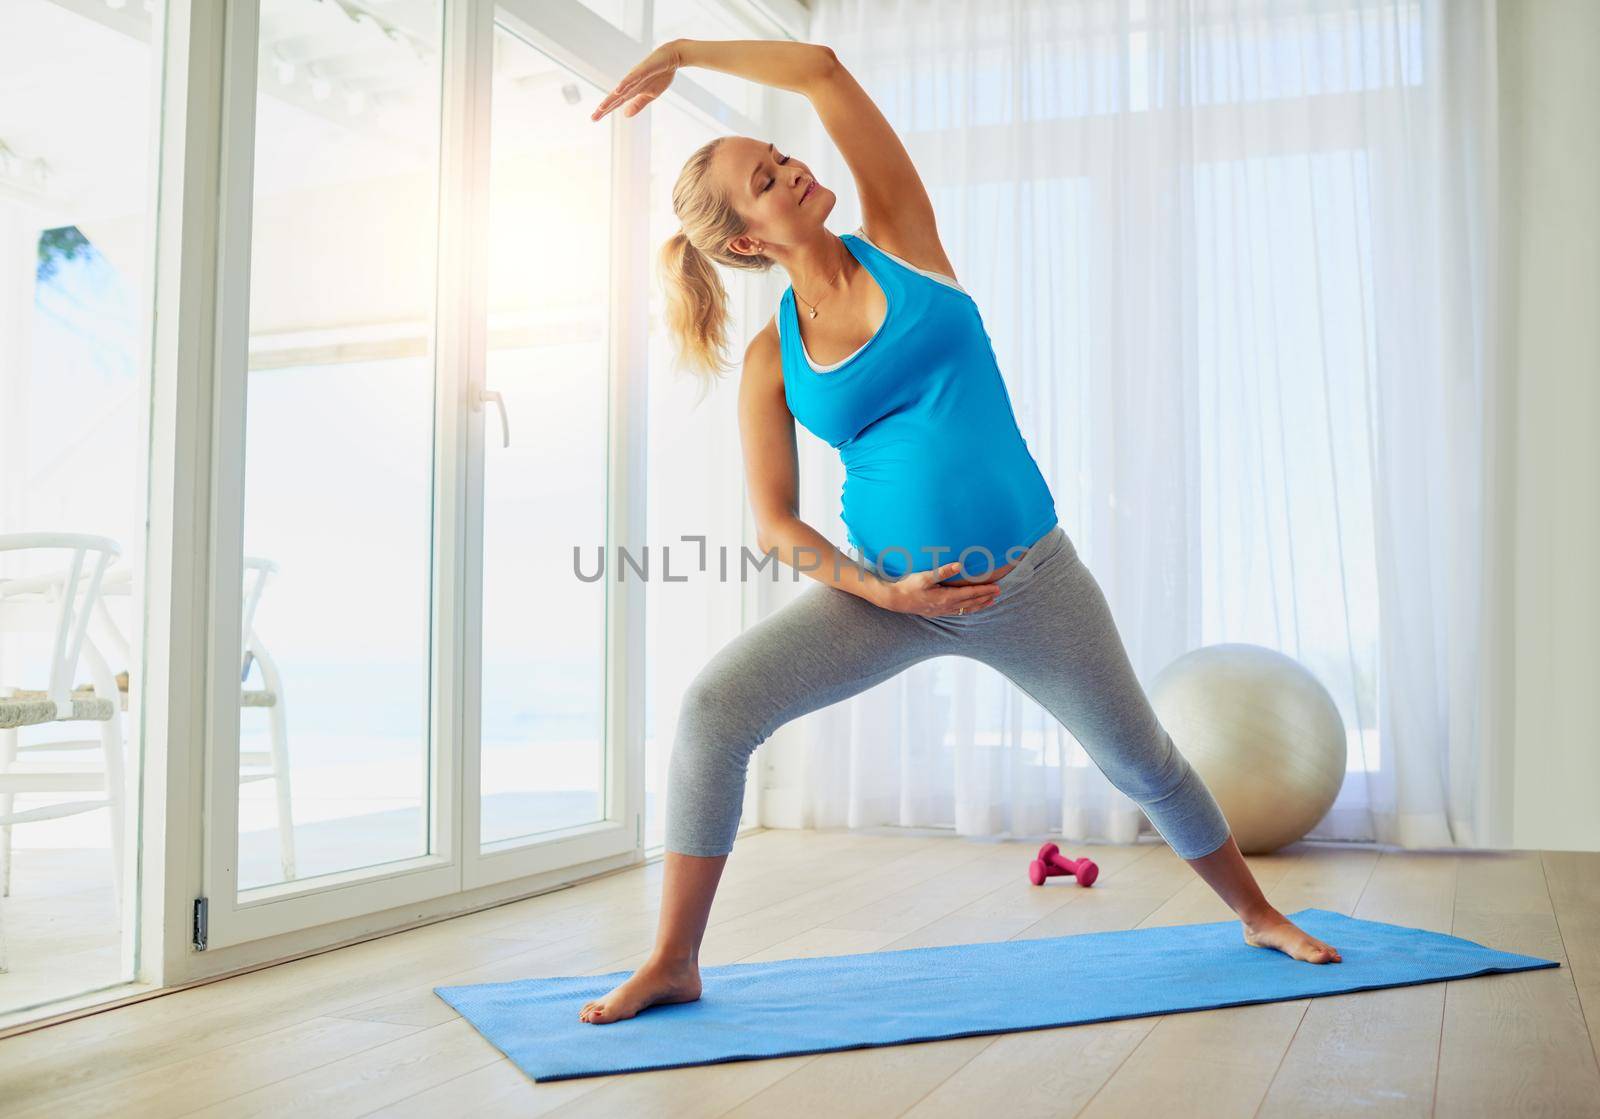 Shot of a pregnant woman working out on an exercise mat at home.